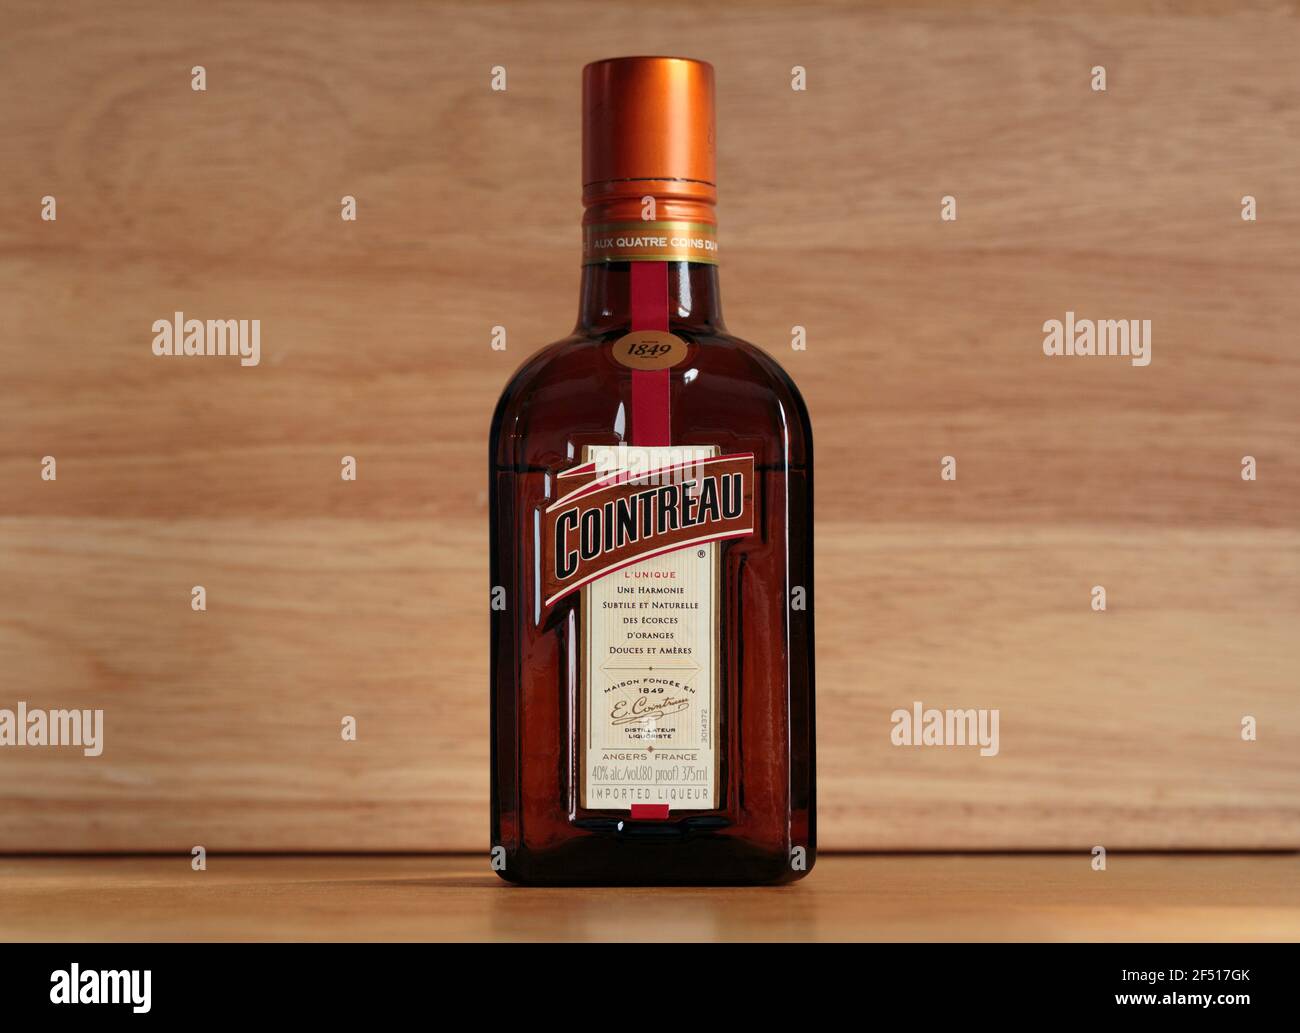 bottle of Cointreau, an orange flavored triple sec liquer, an aperitif or digestif, from Saint-Barthelemy-d'Anjou, France Stock Photo